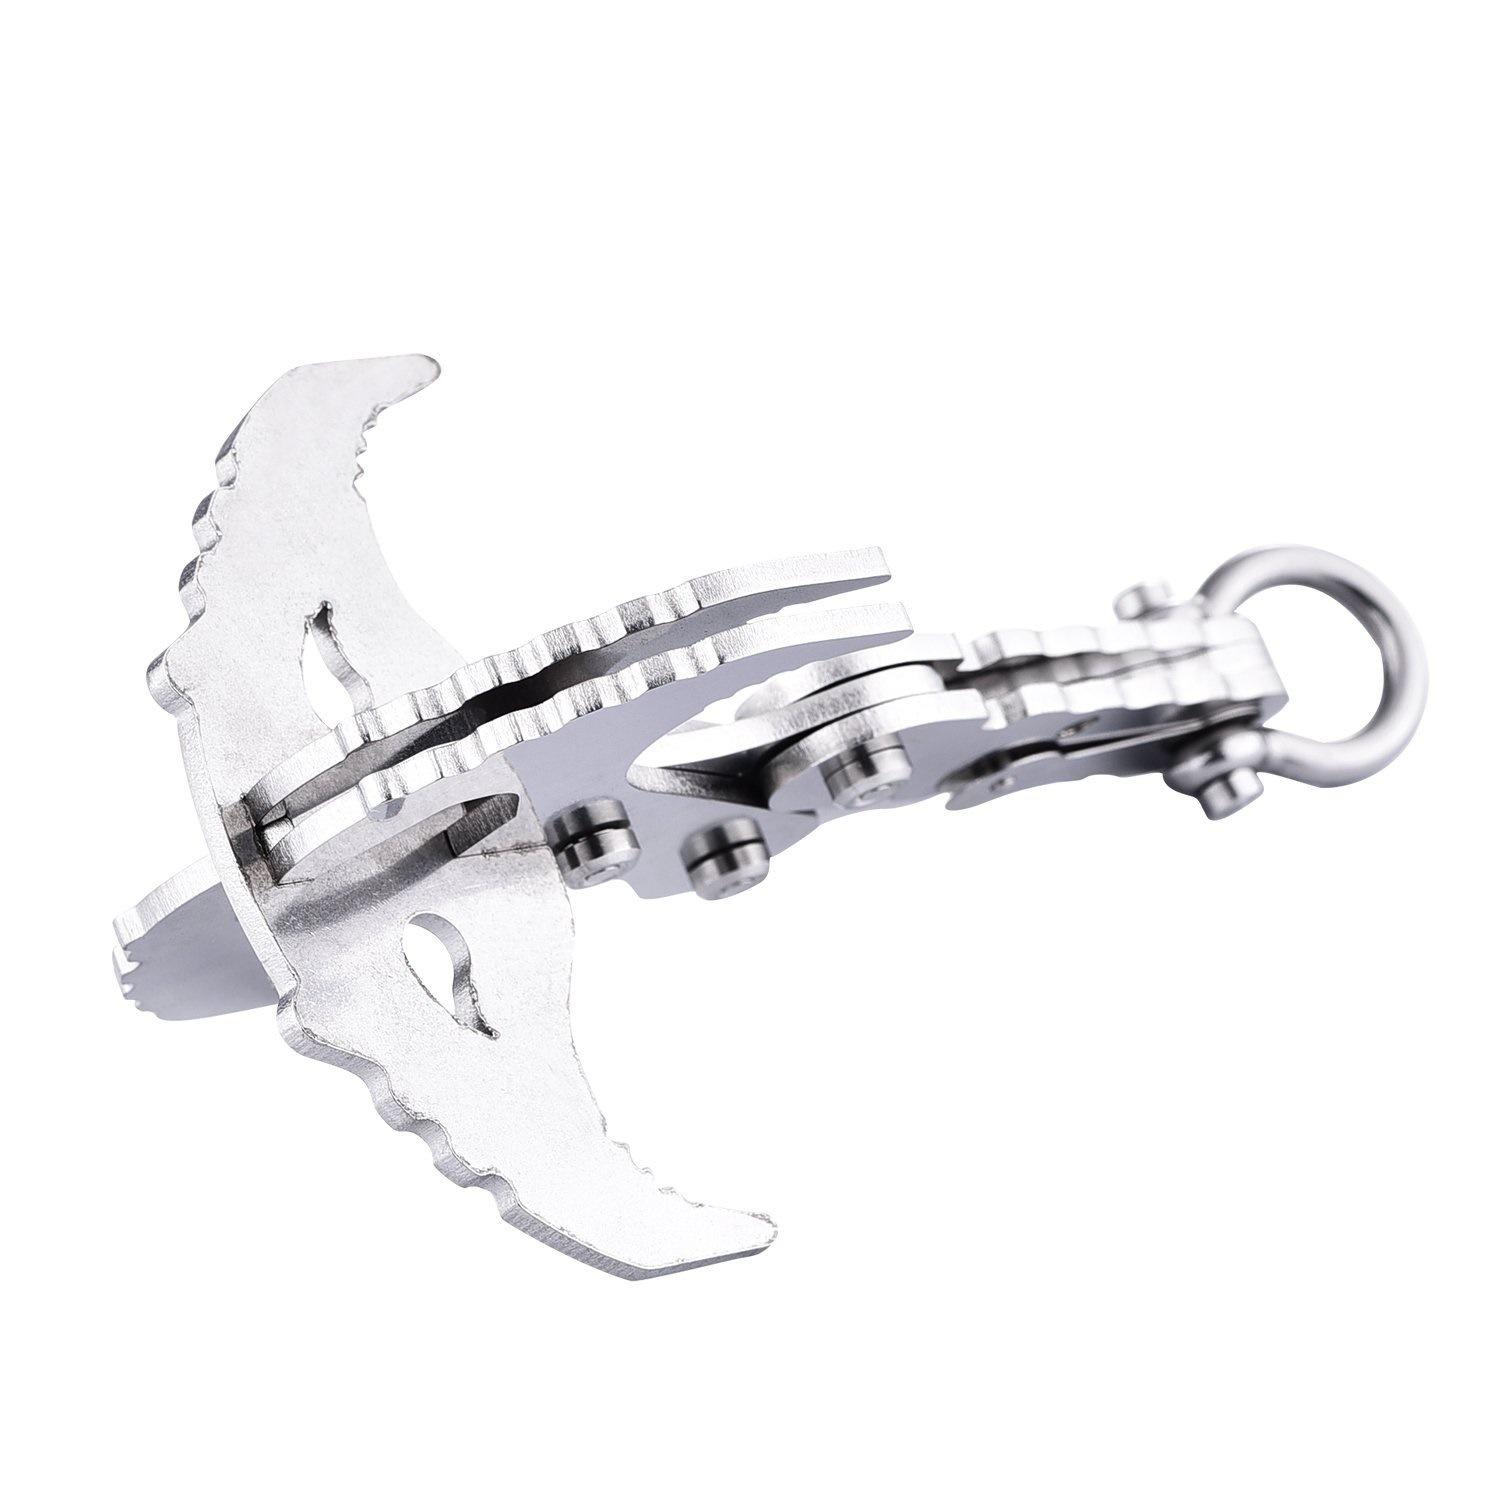 Snap Version of Outdoor Climbing Multi-functional Climbing Hook Gravity Stainless Steel